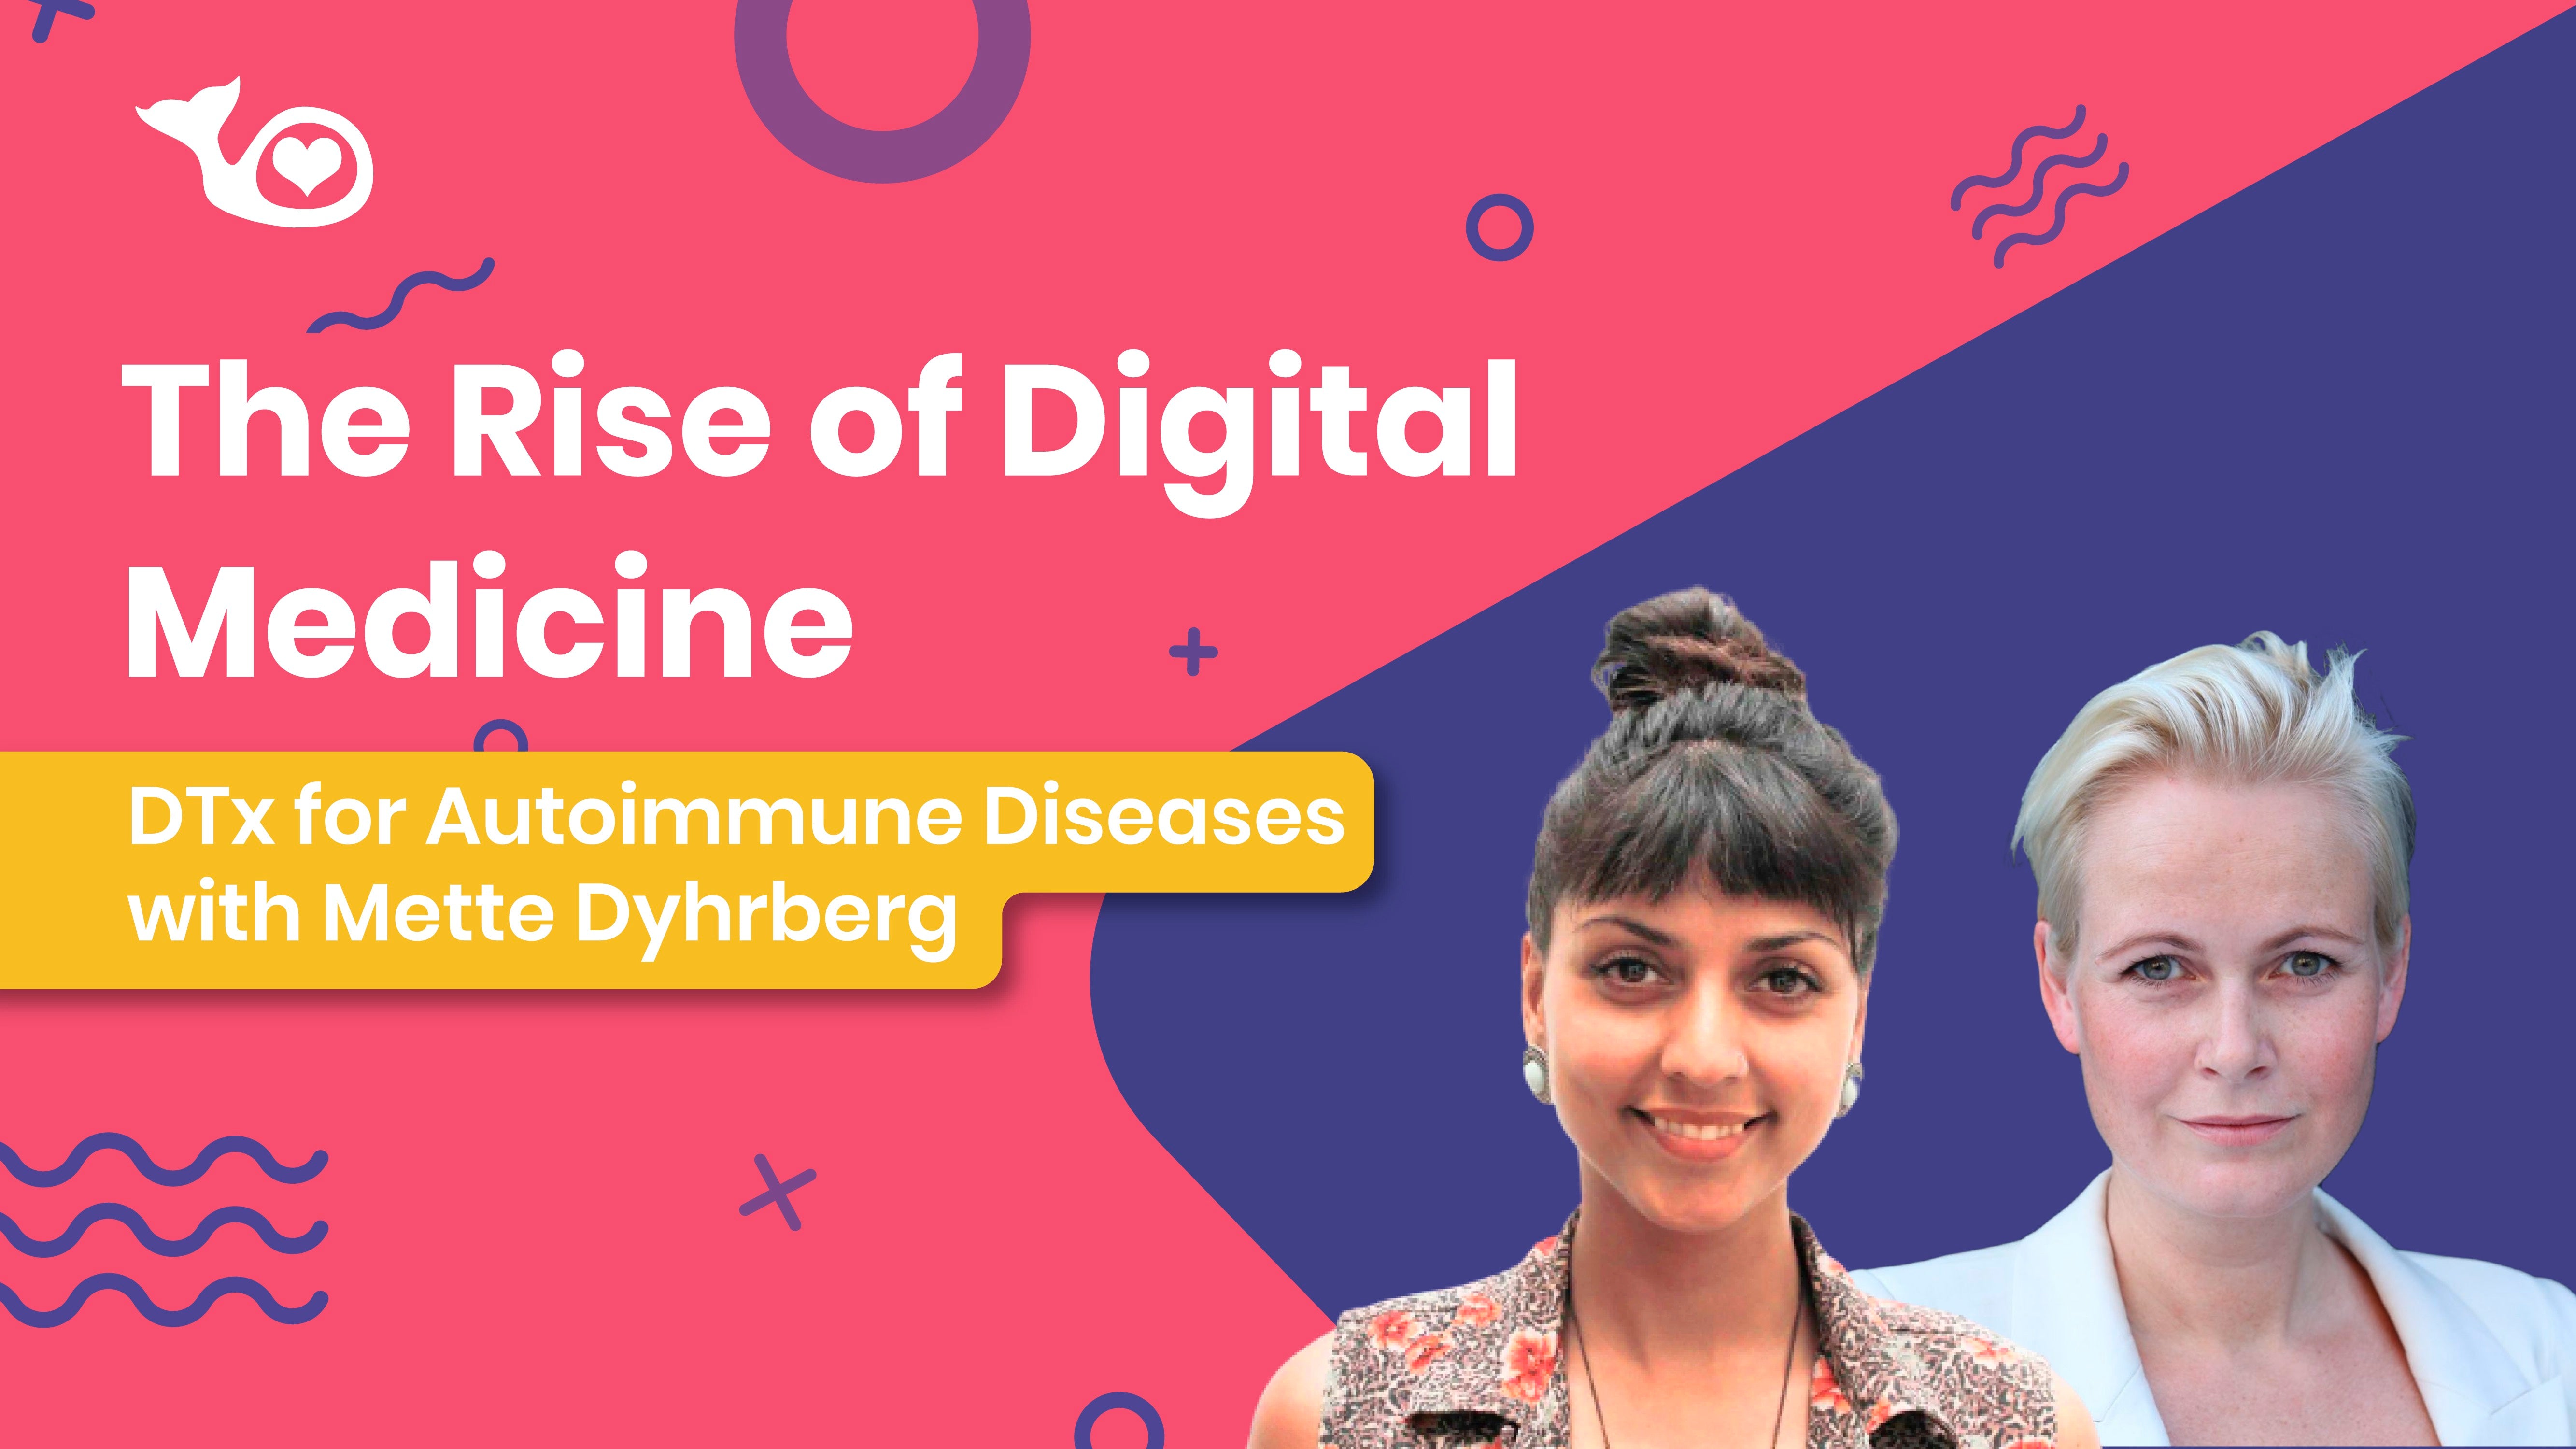 DTx for Autoimmune Diseases with Mette Dyhrberg of MyMee